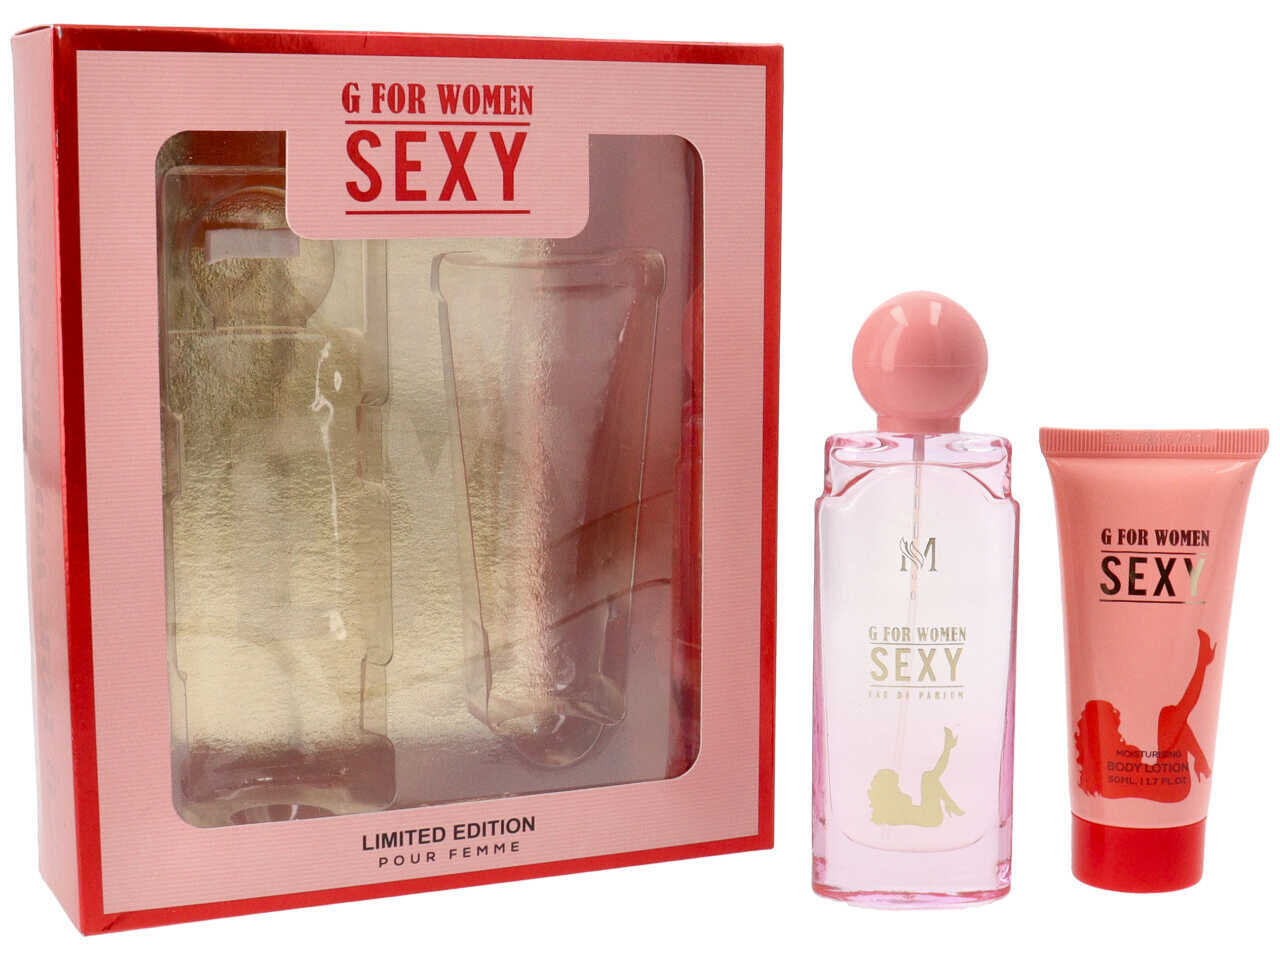 MIRAGE G FOR WOMAN SEXY SET REGALO